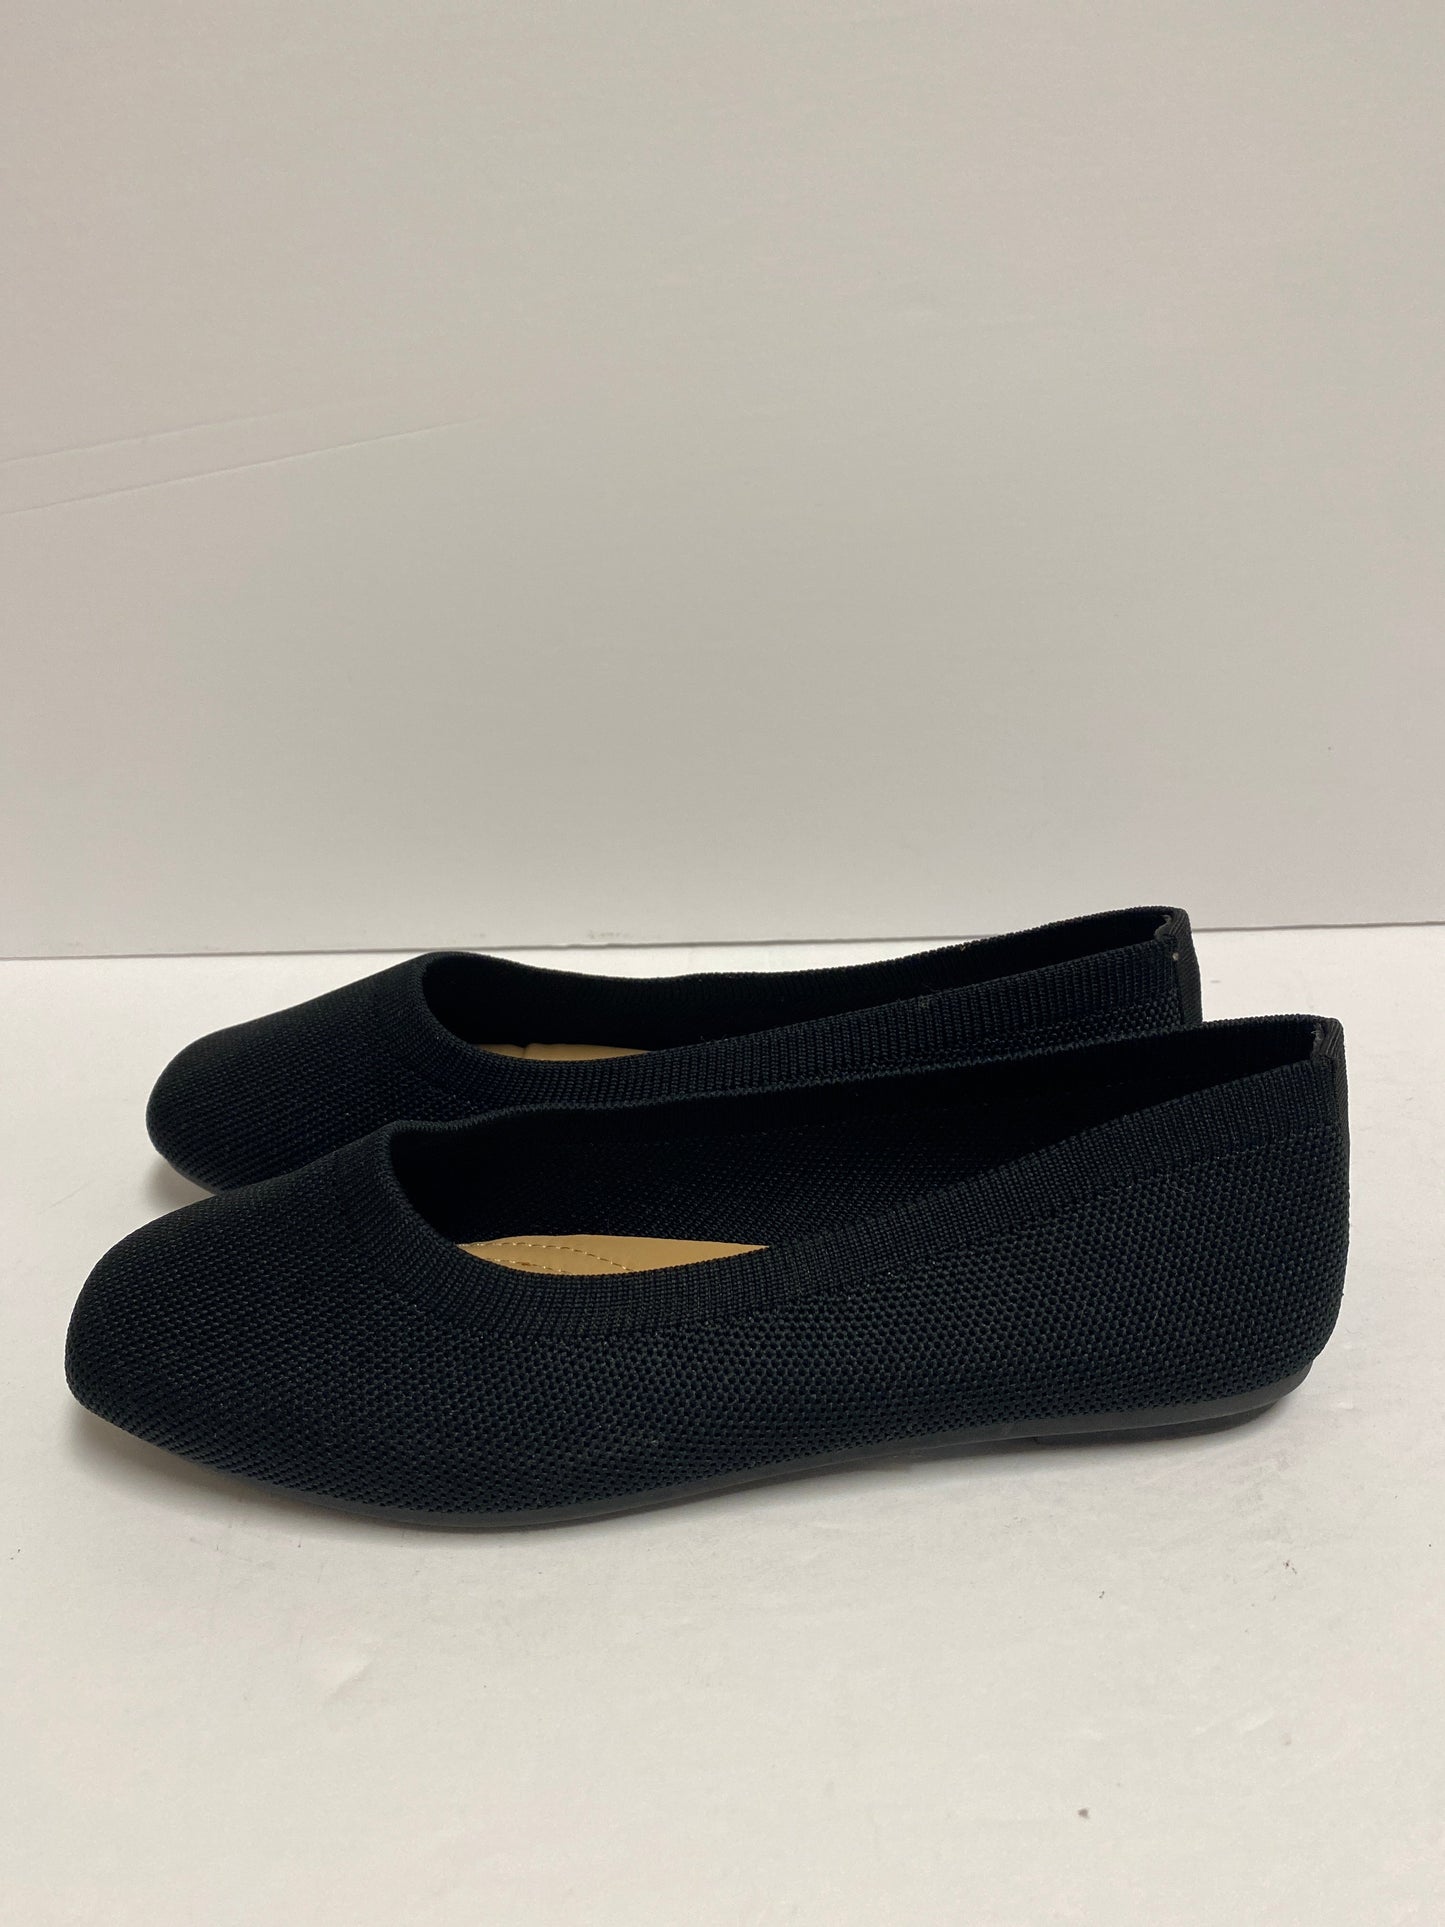 Shoes Flats Ballet By Forever  Size: 5